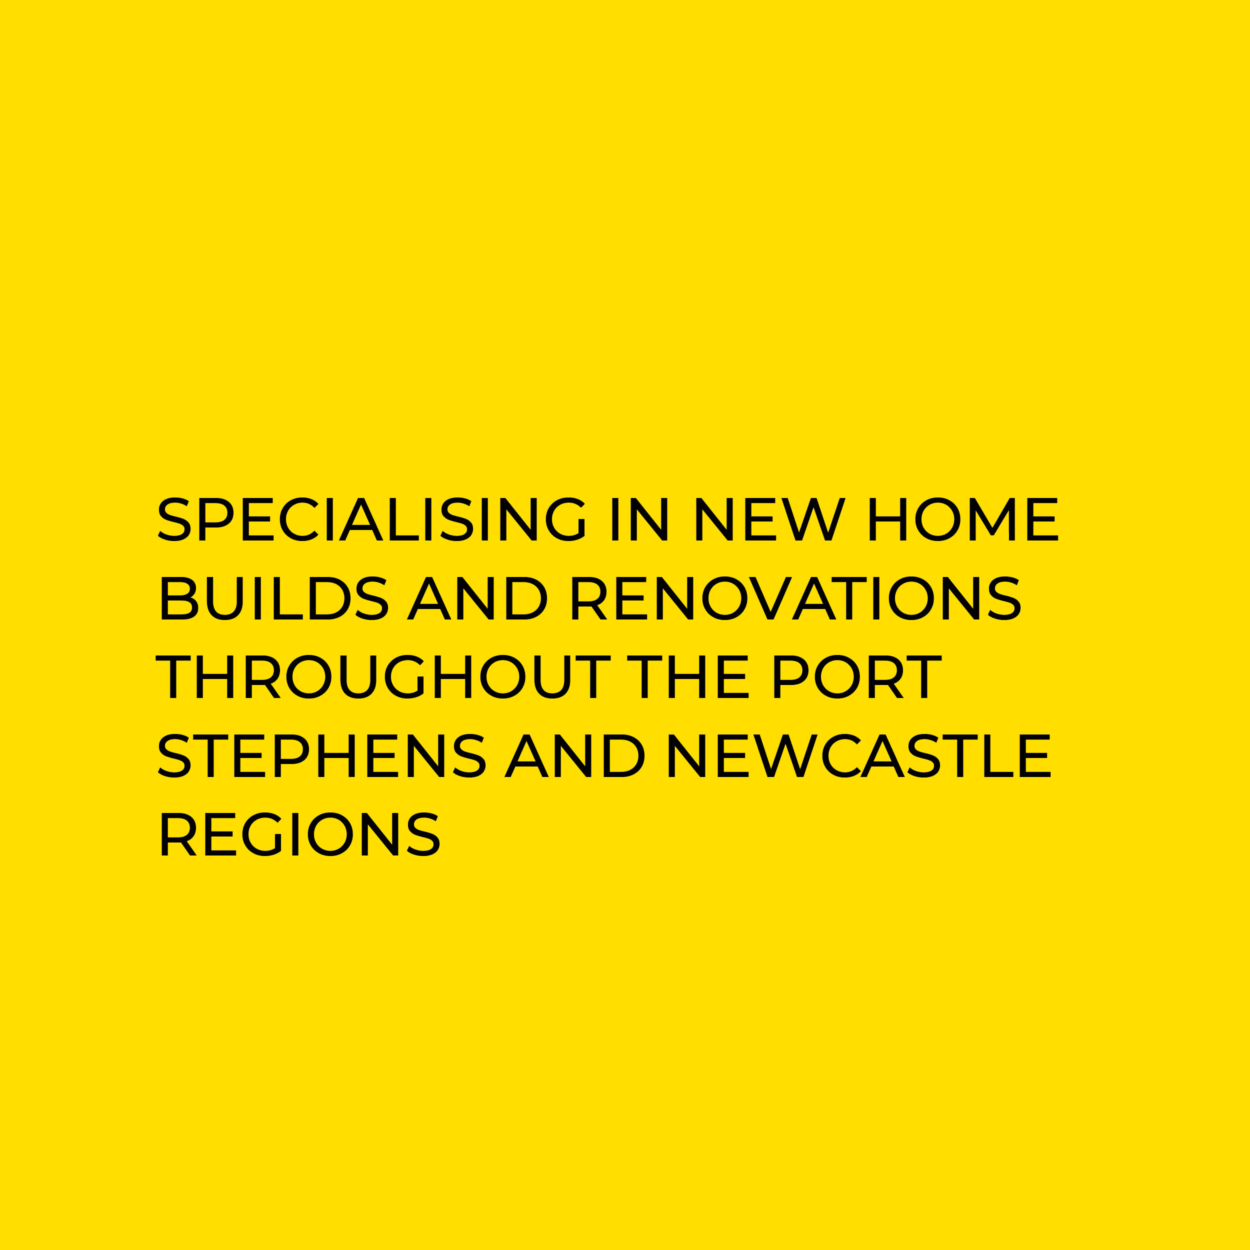 Specialising in new home builds and renovations throughout the Port Stephens and Newcastle regions